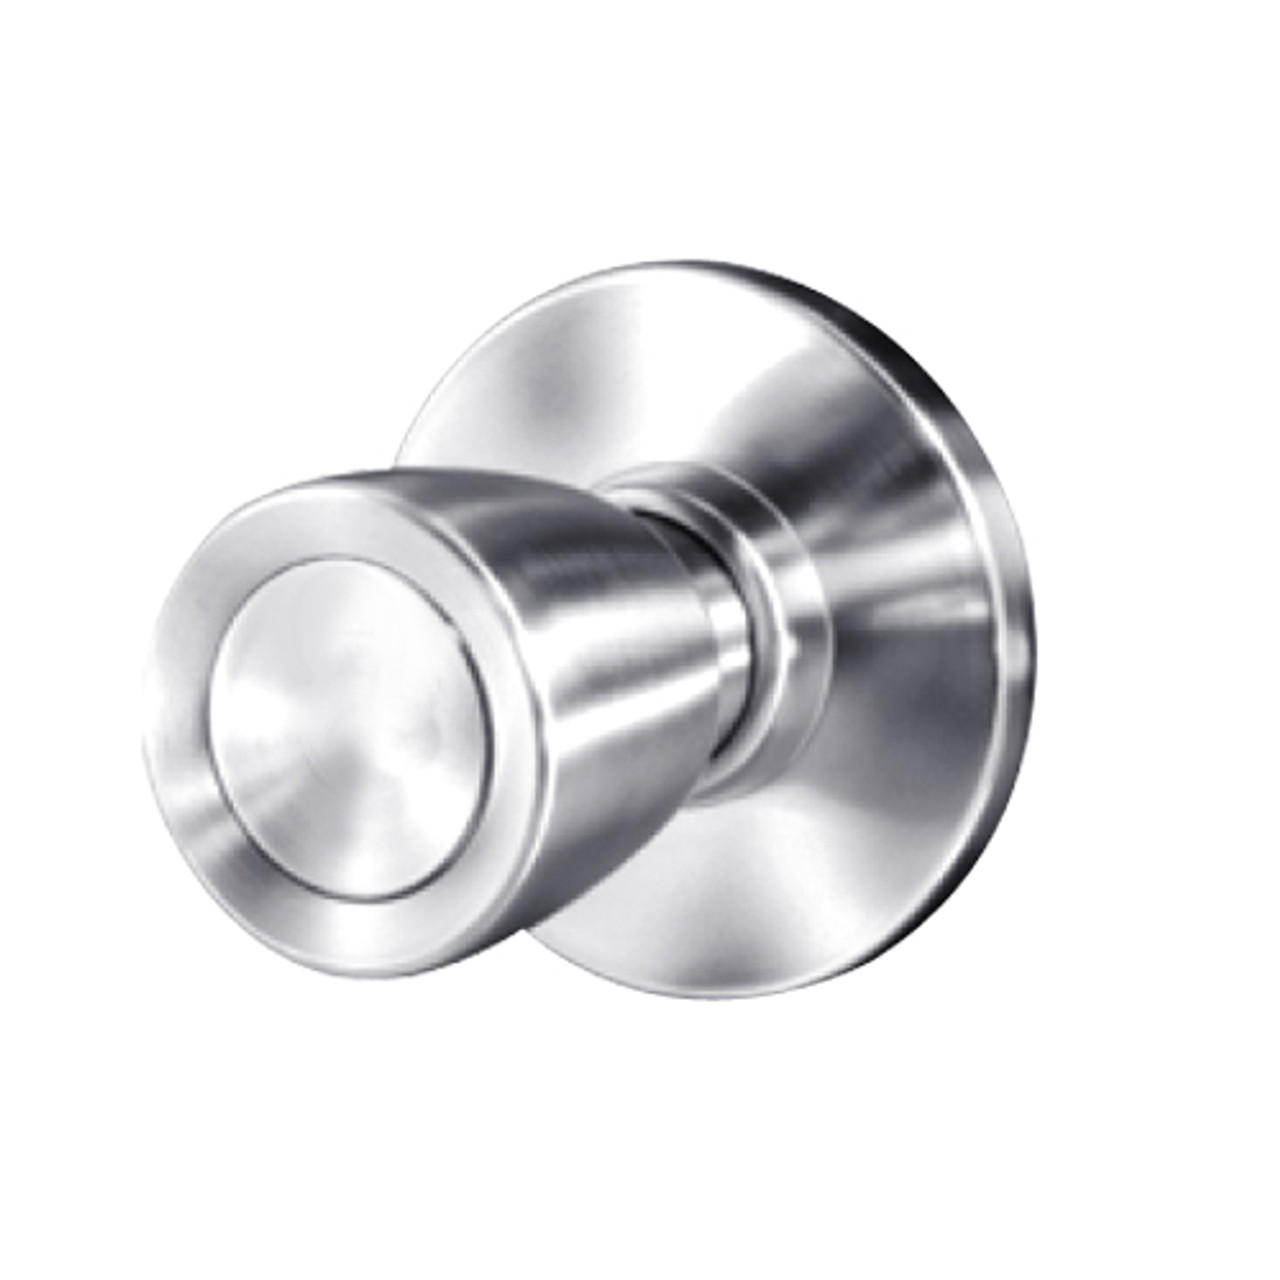 8K30NX6AS3625 Best 8K Series Exit Heavy Duty Cylindrical Knob Locks with Tulip Style in Bright Chrome